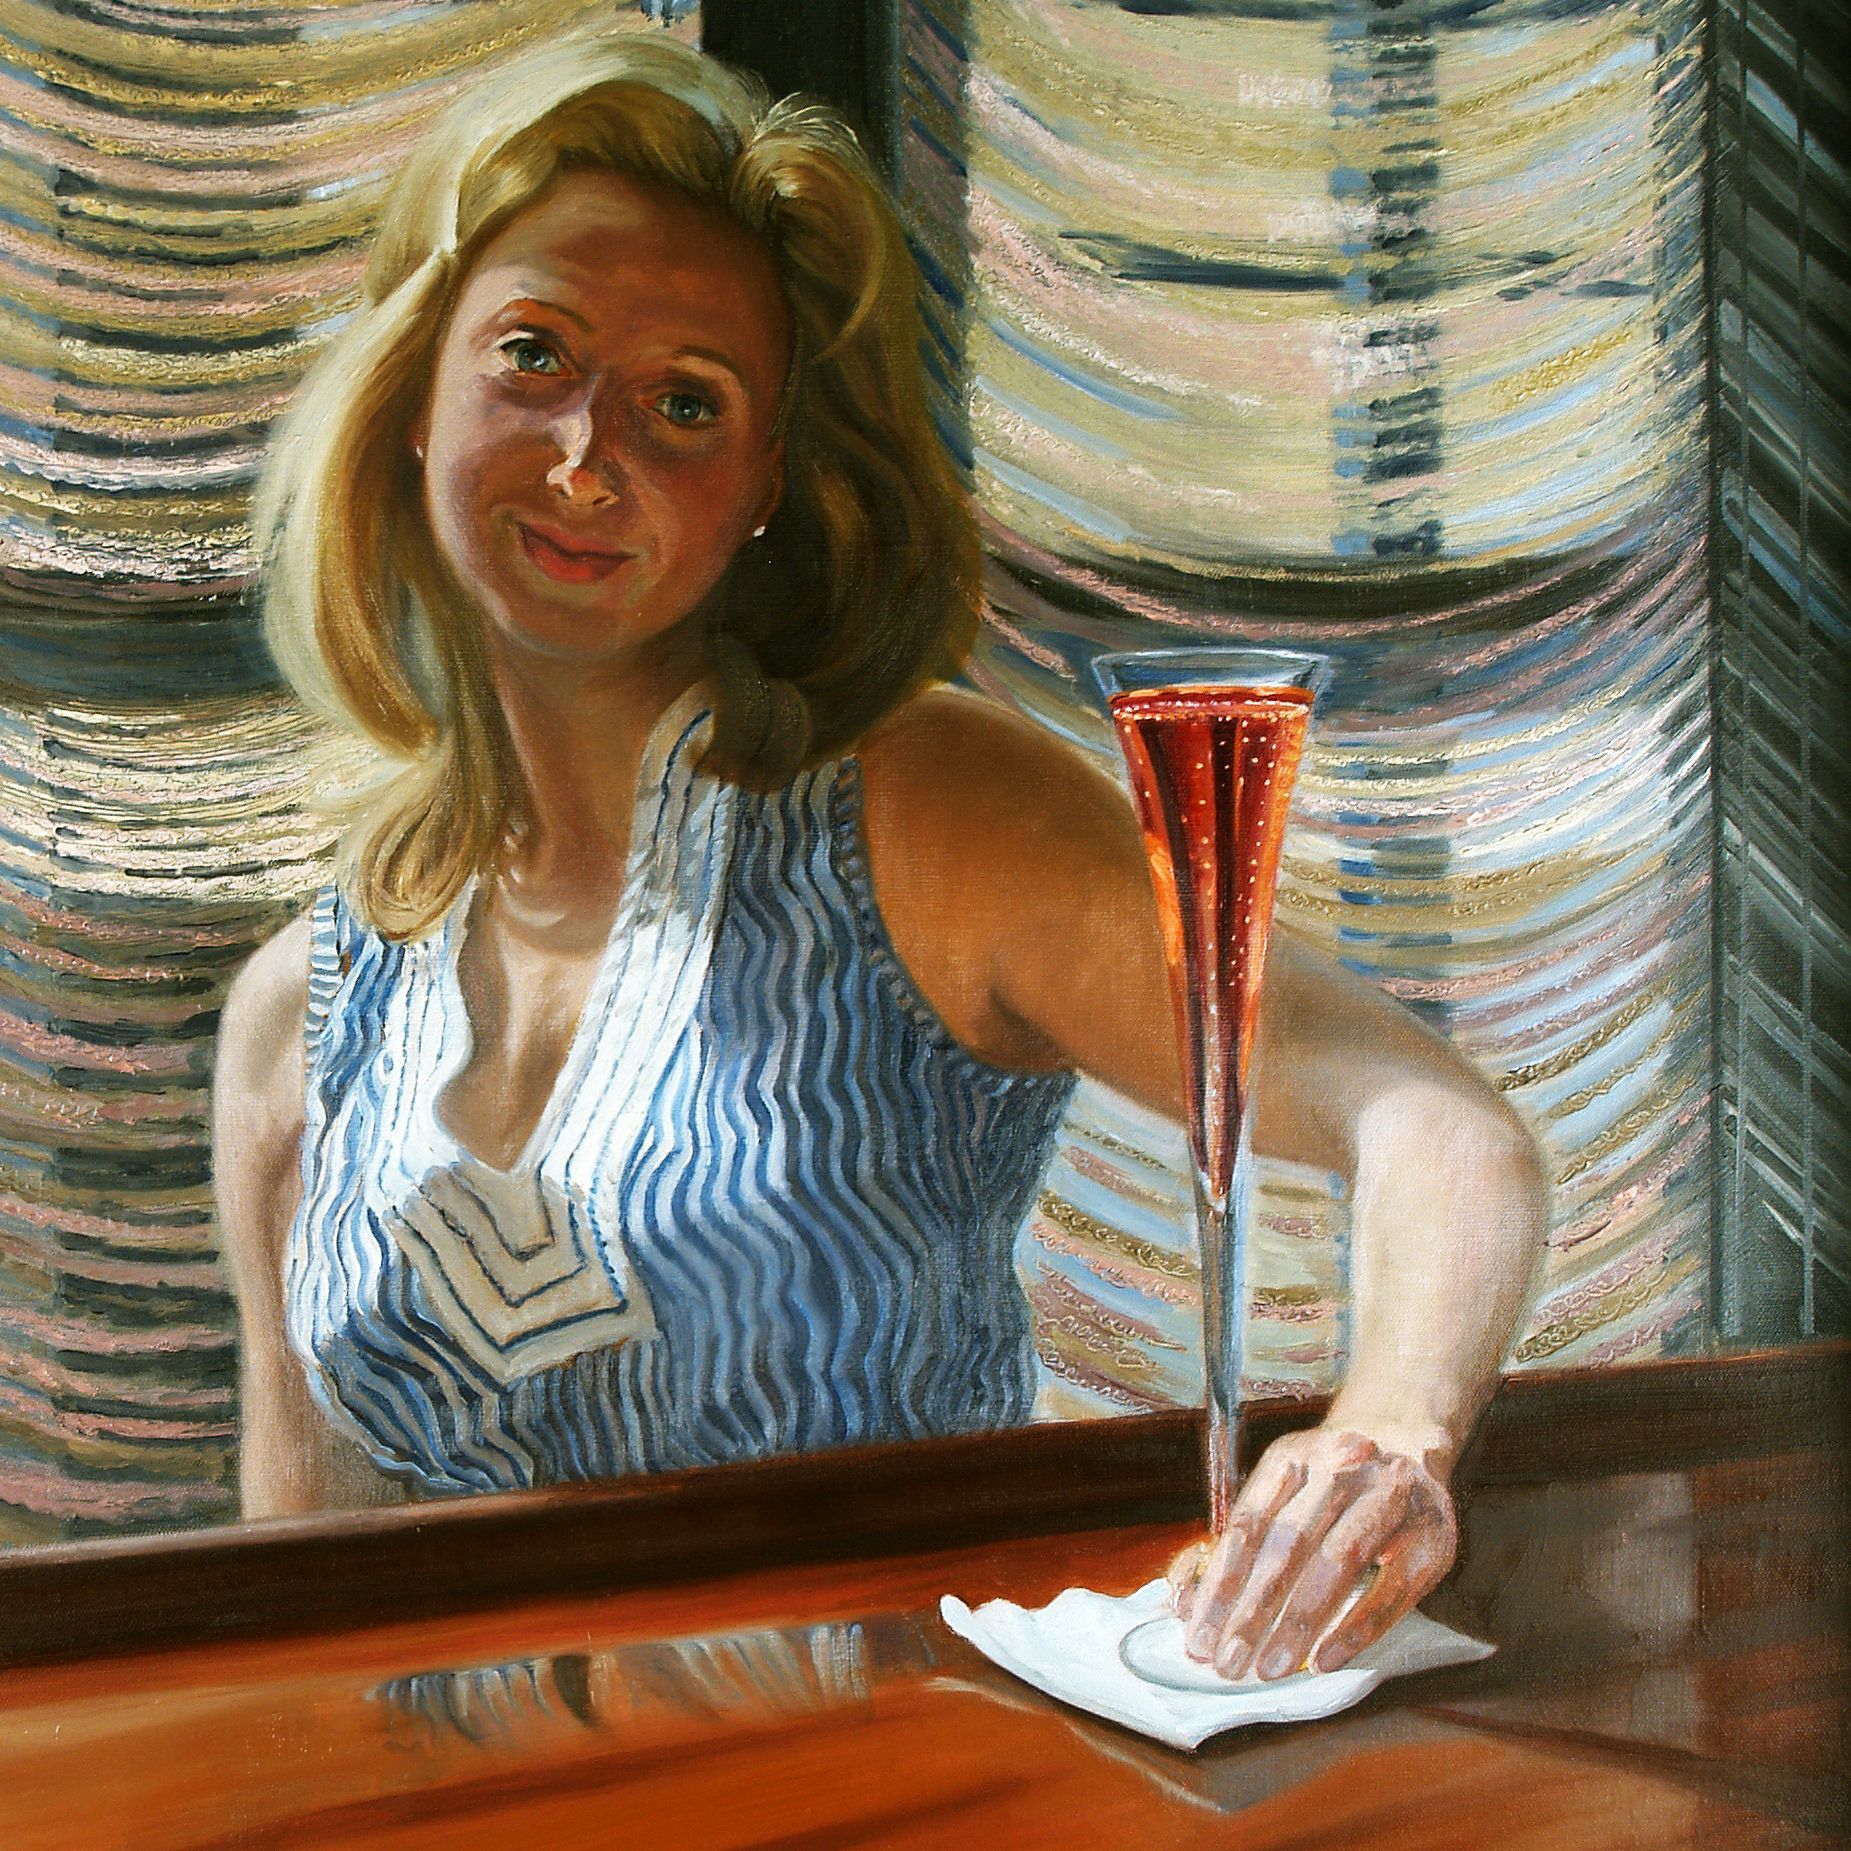 Bubbly Afternoon | Figurative Oil Painting by John Varriano